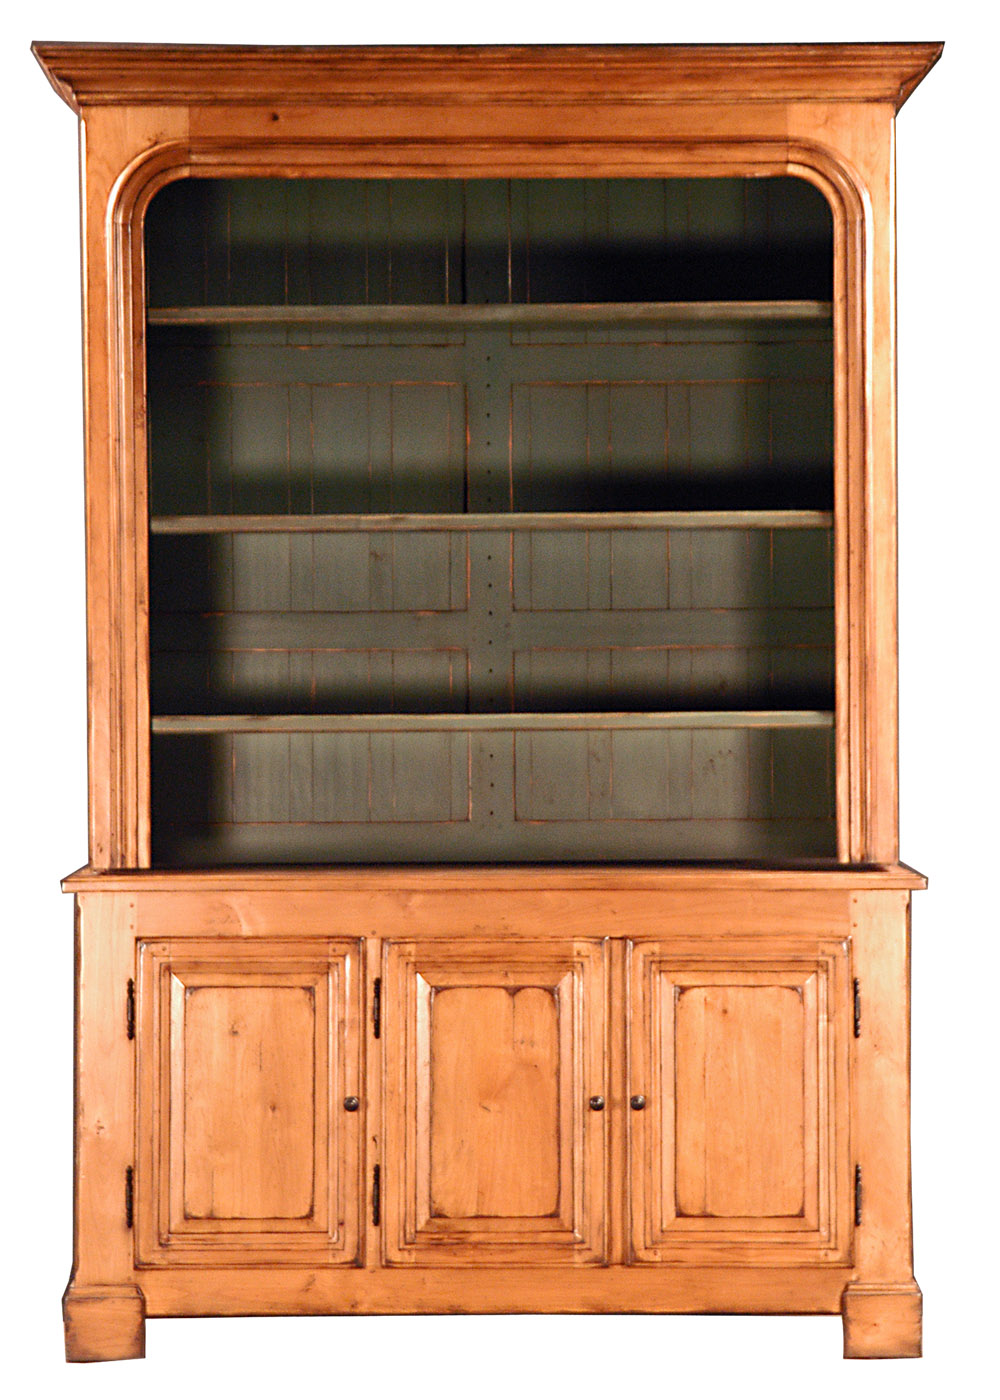 Haskell transitional country cabinet with open shelves and base door by Woodland furniture